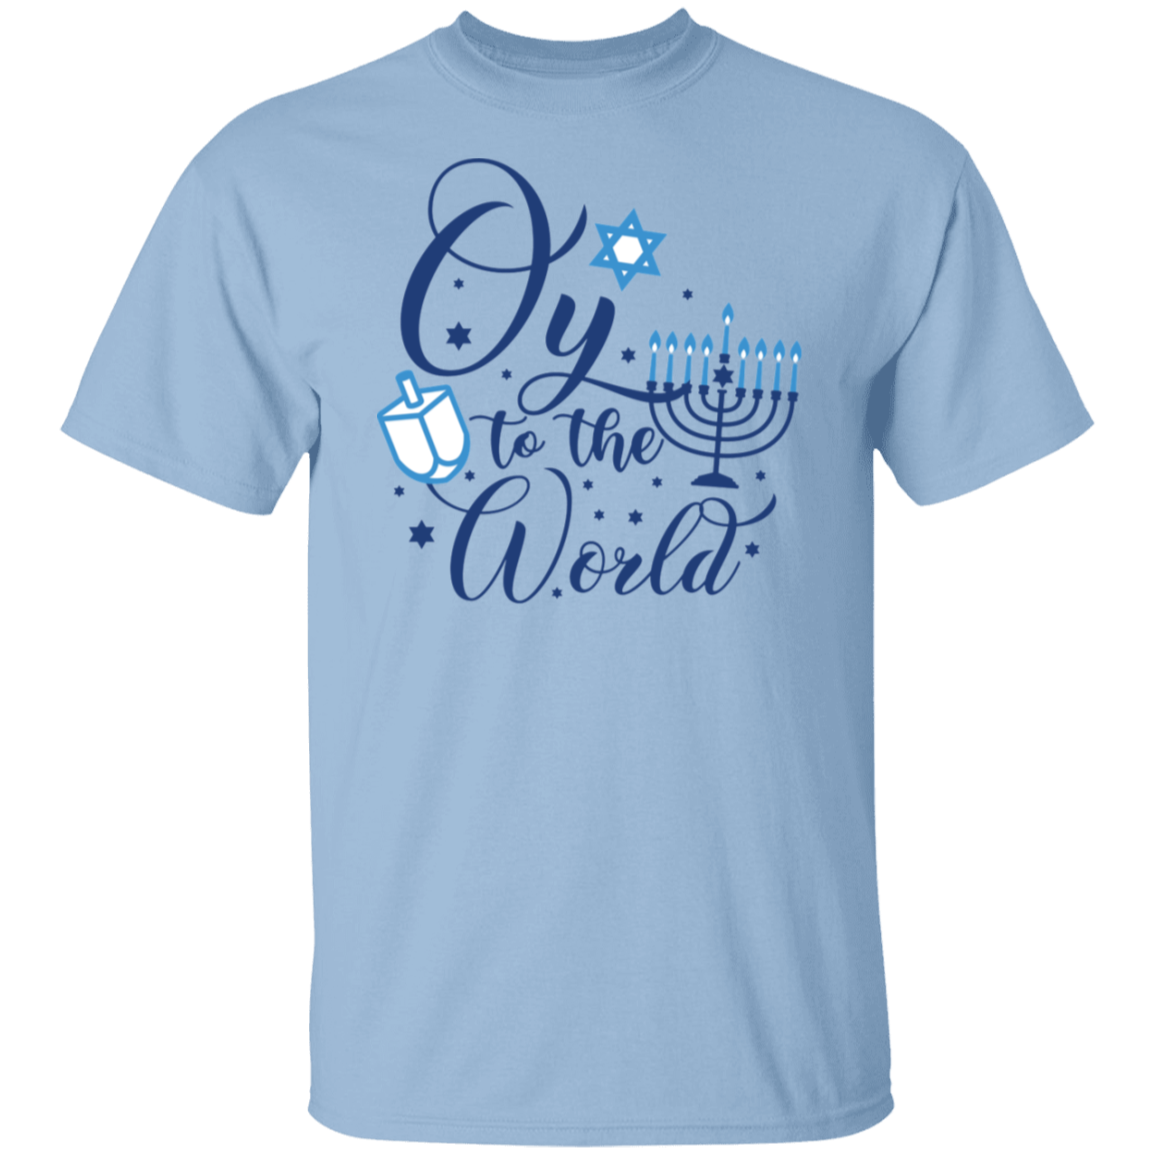 Oy to the World 5.3 oz. T-Shirt